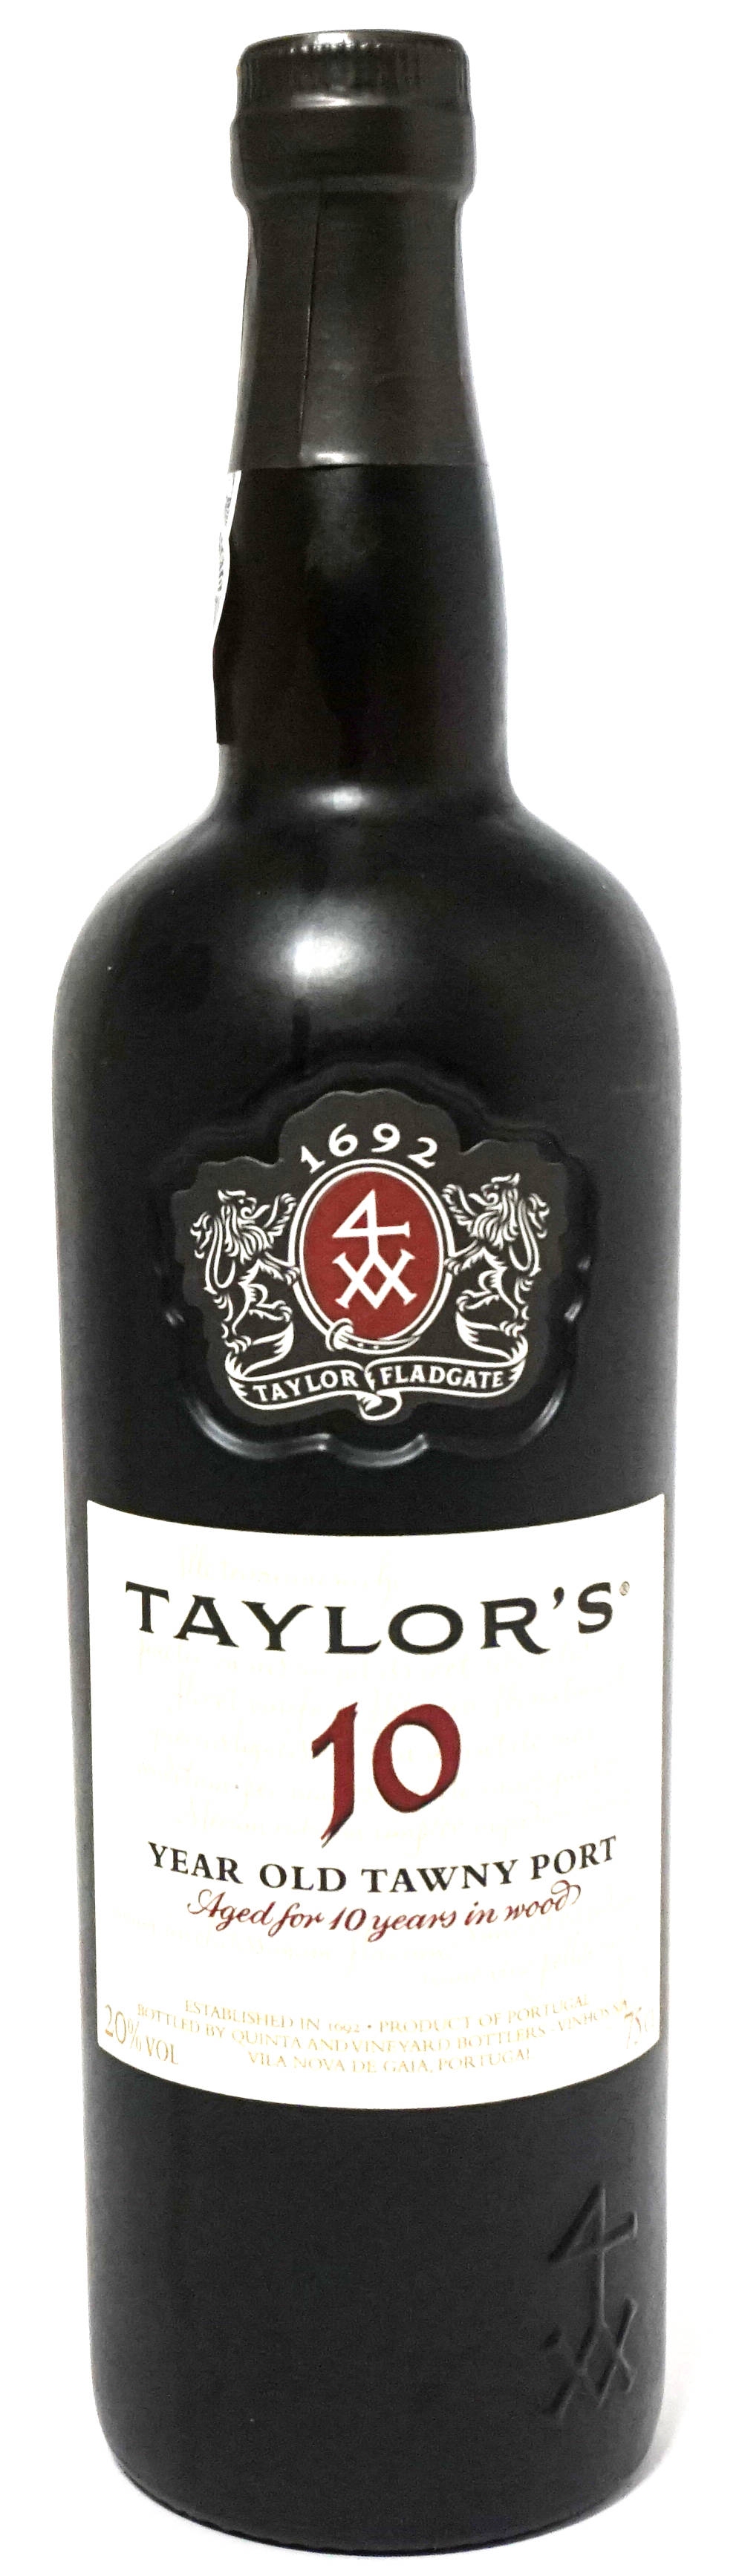 Taylor's 10 Years Old Twany Port